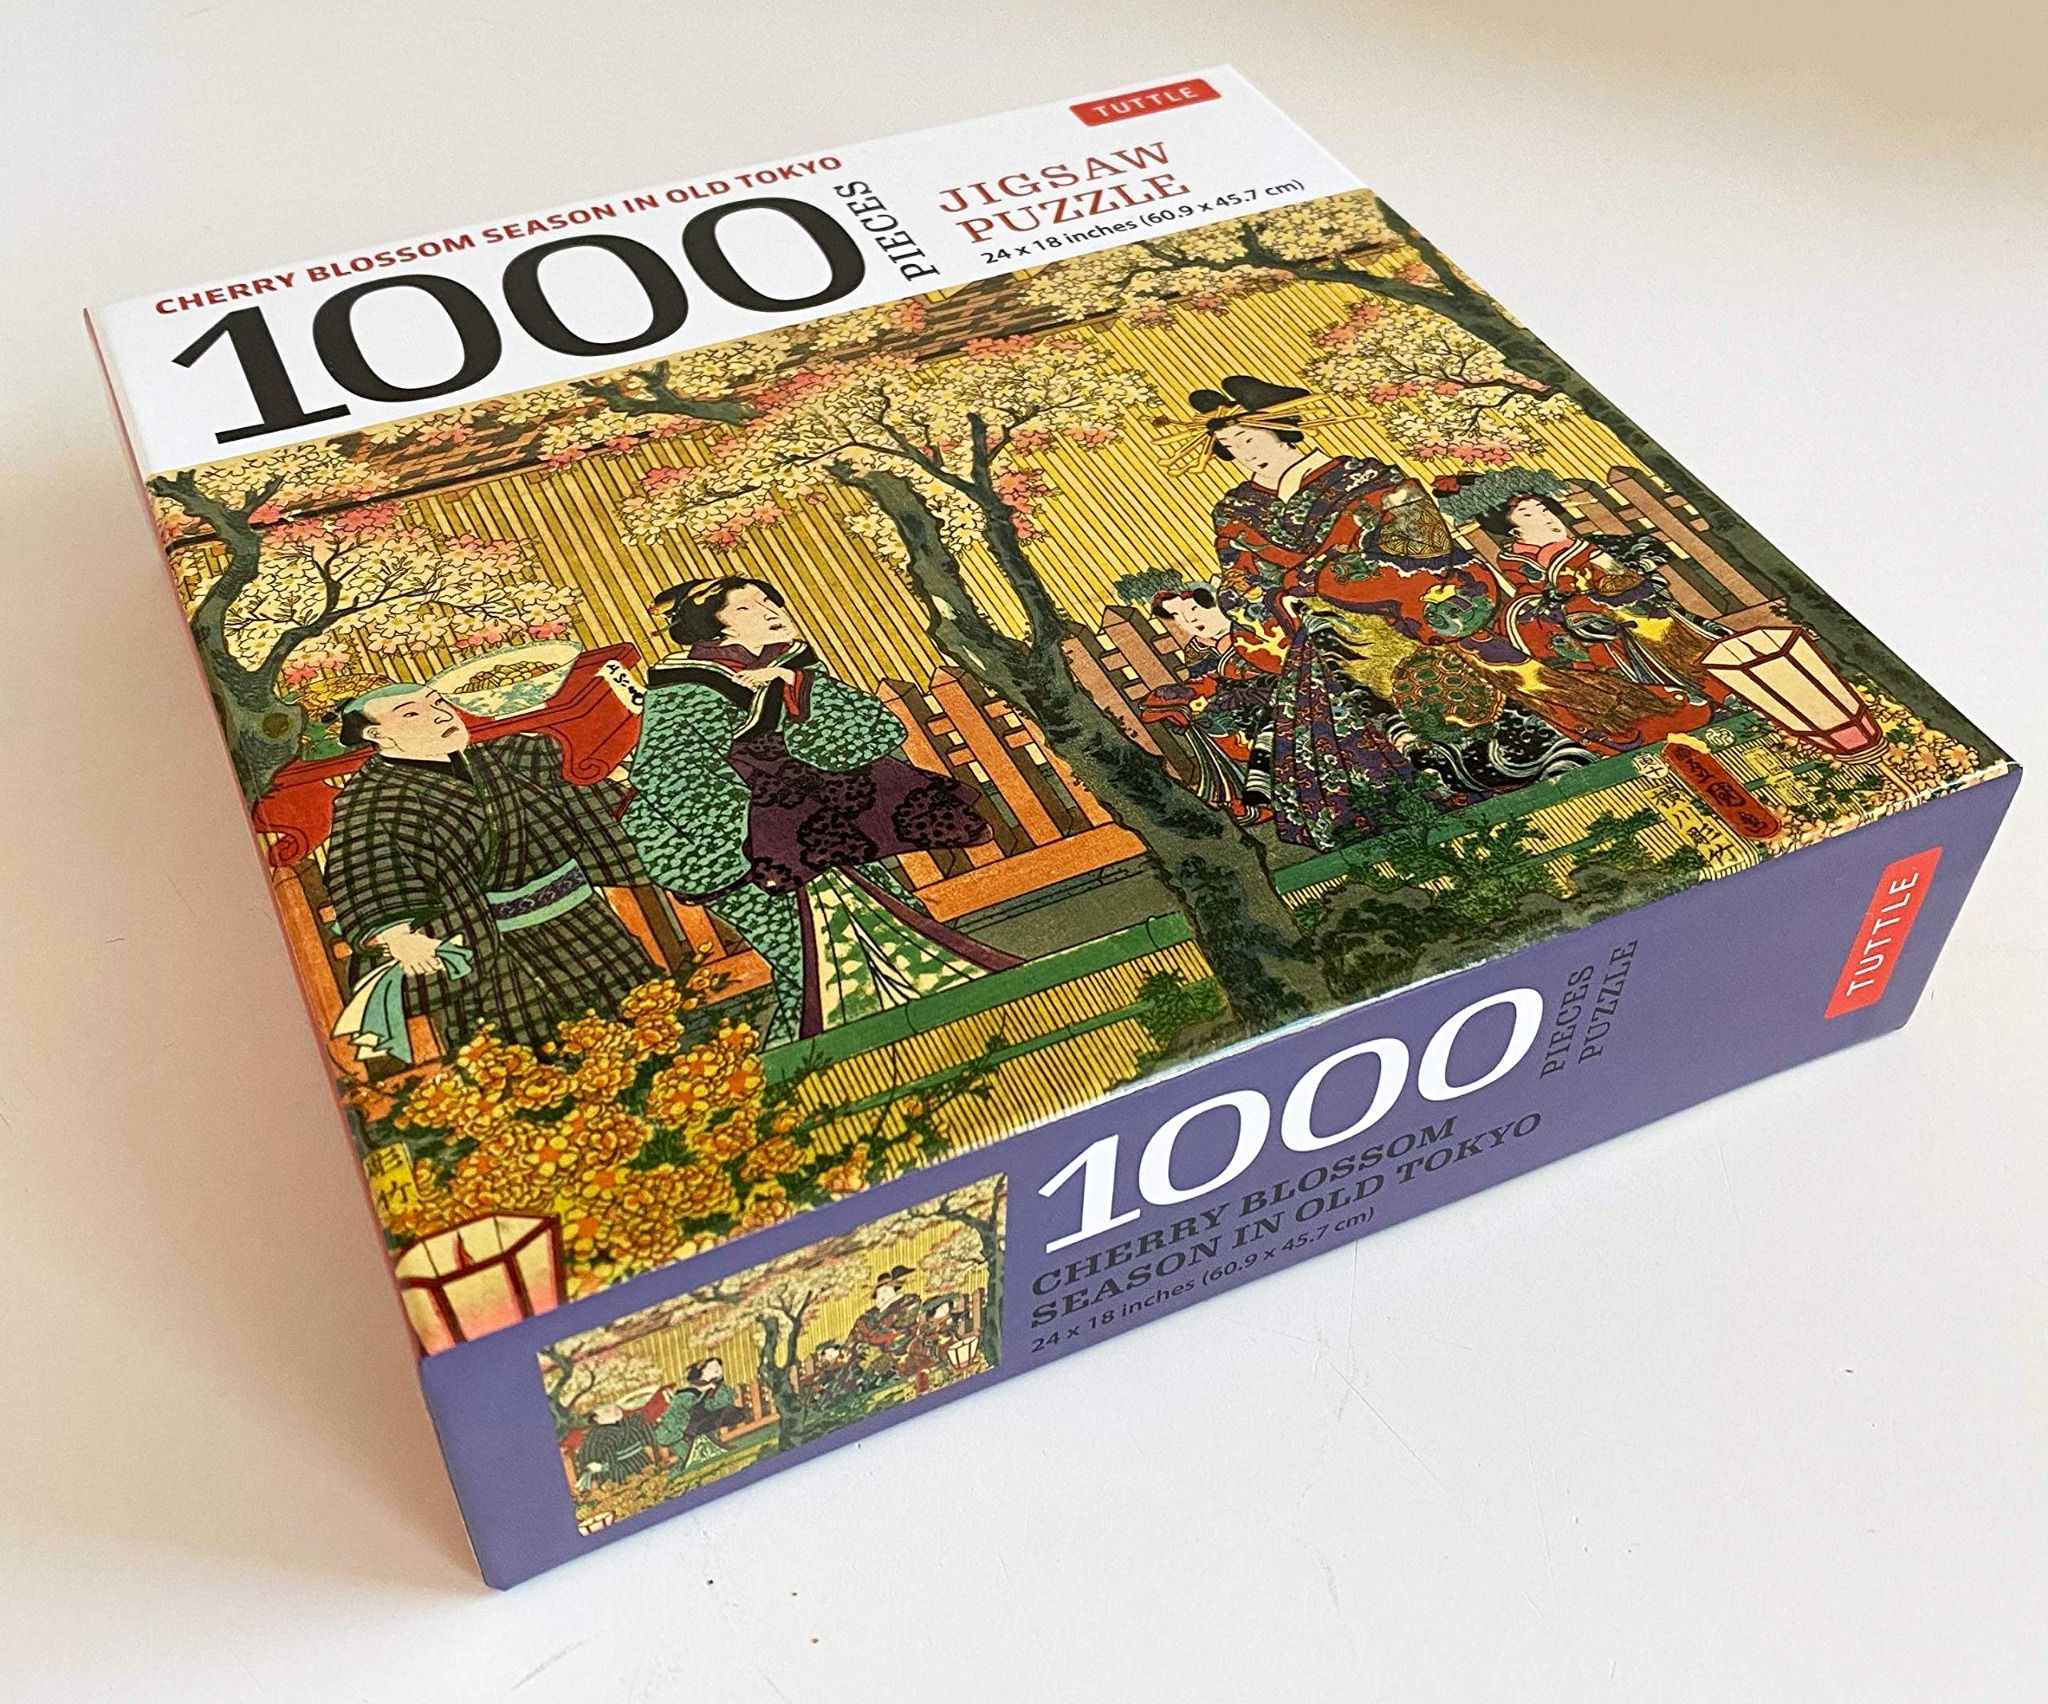  Cherry Blossom Season in Old Tokyo - 1000 Piece Jigsaw Puzzle 